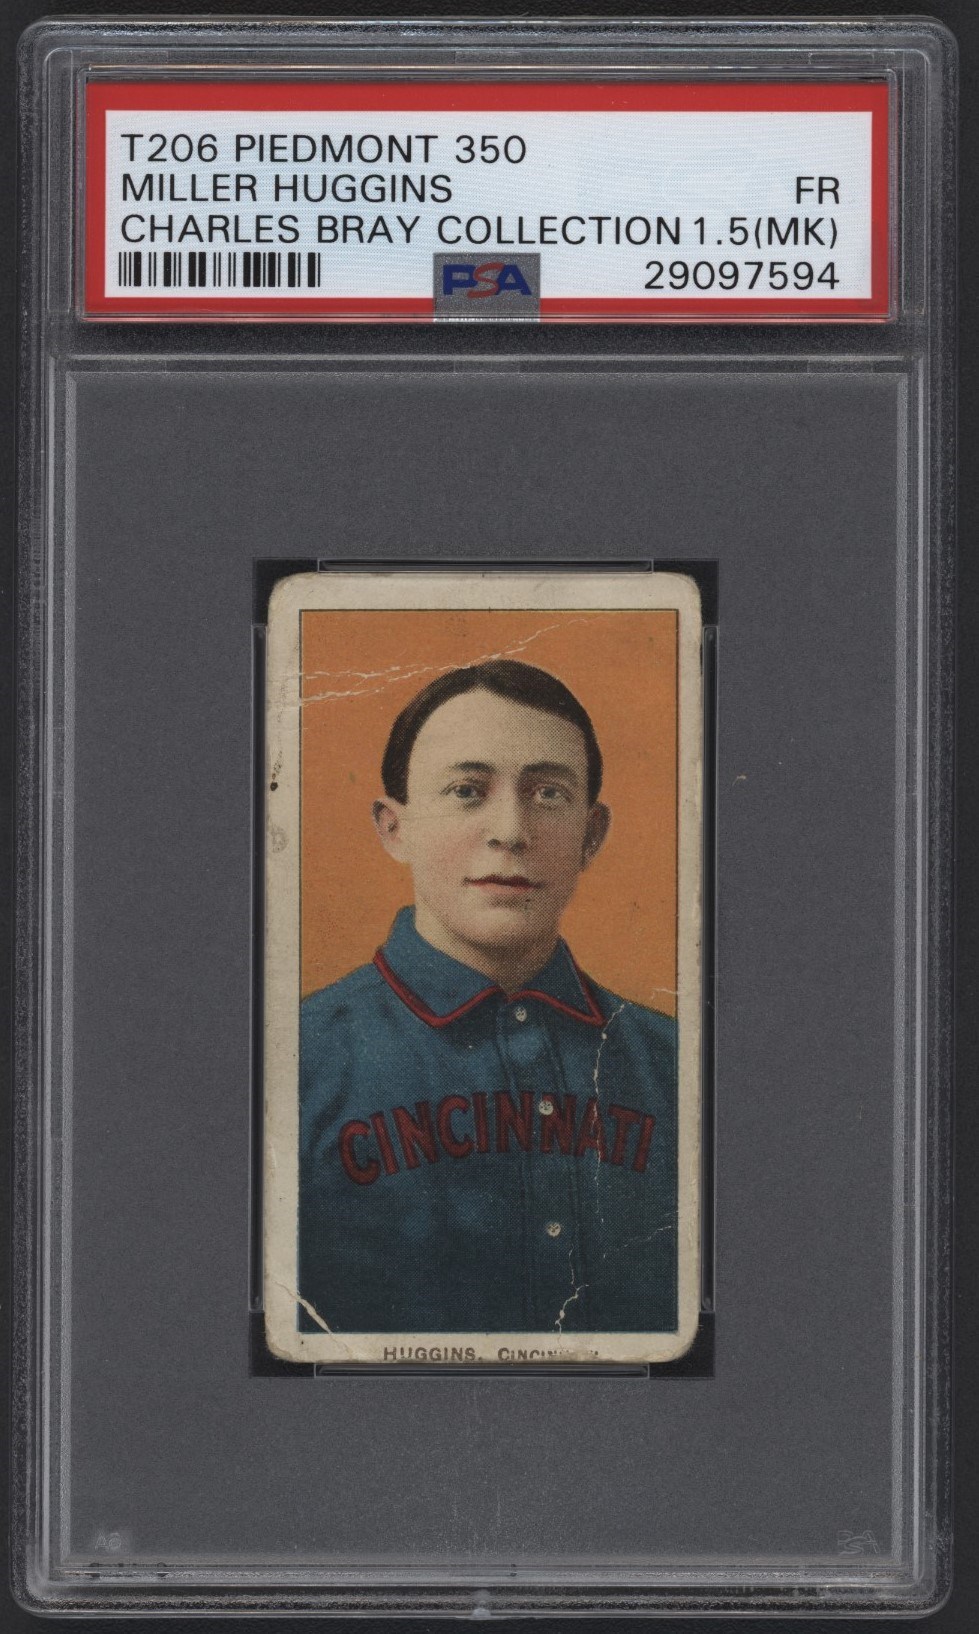 Baseball and Trading Cards - T206 Piedmont 350 Miller Huggins PSA 1.5 From the Charles Bray Collection